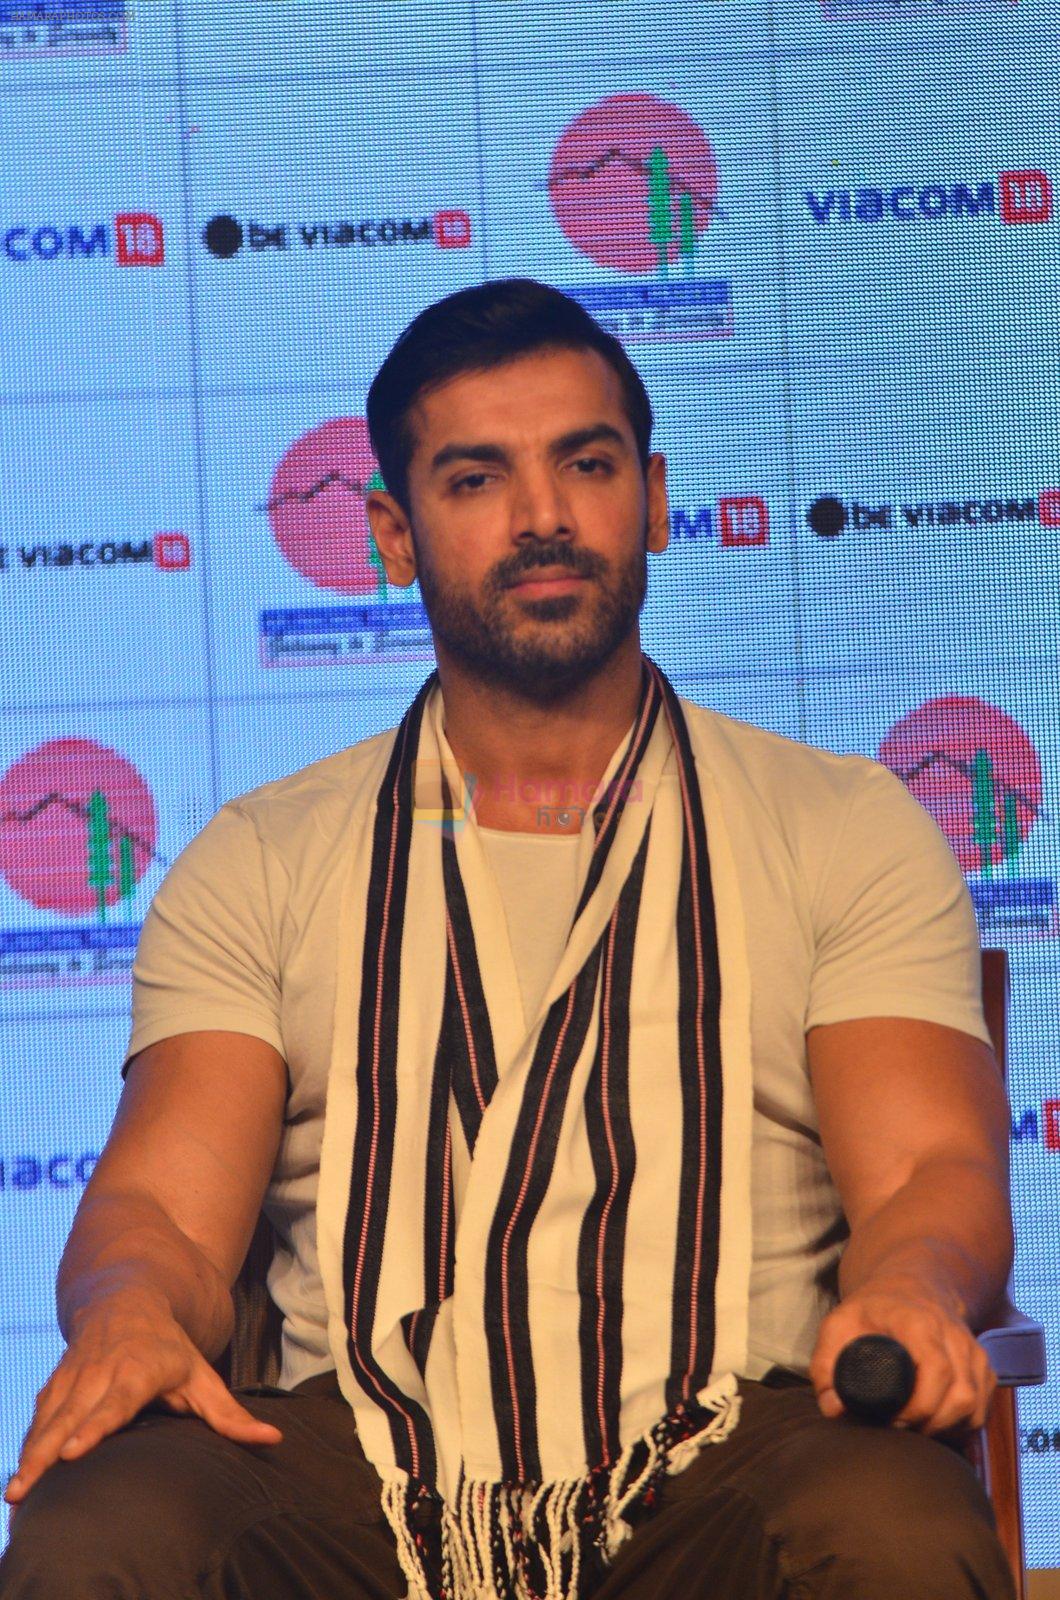 John Abraham during a tourism program for the North East Indian state of Arunachal Pradesh in Mumbai on 6th Sept 2016